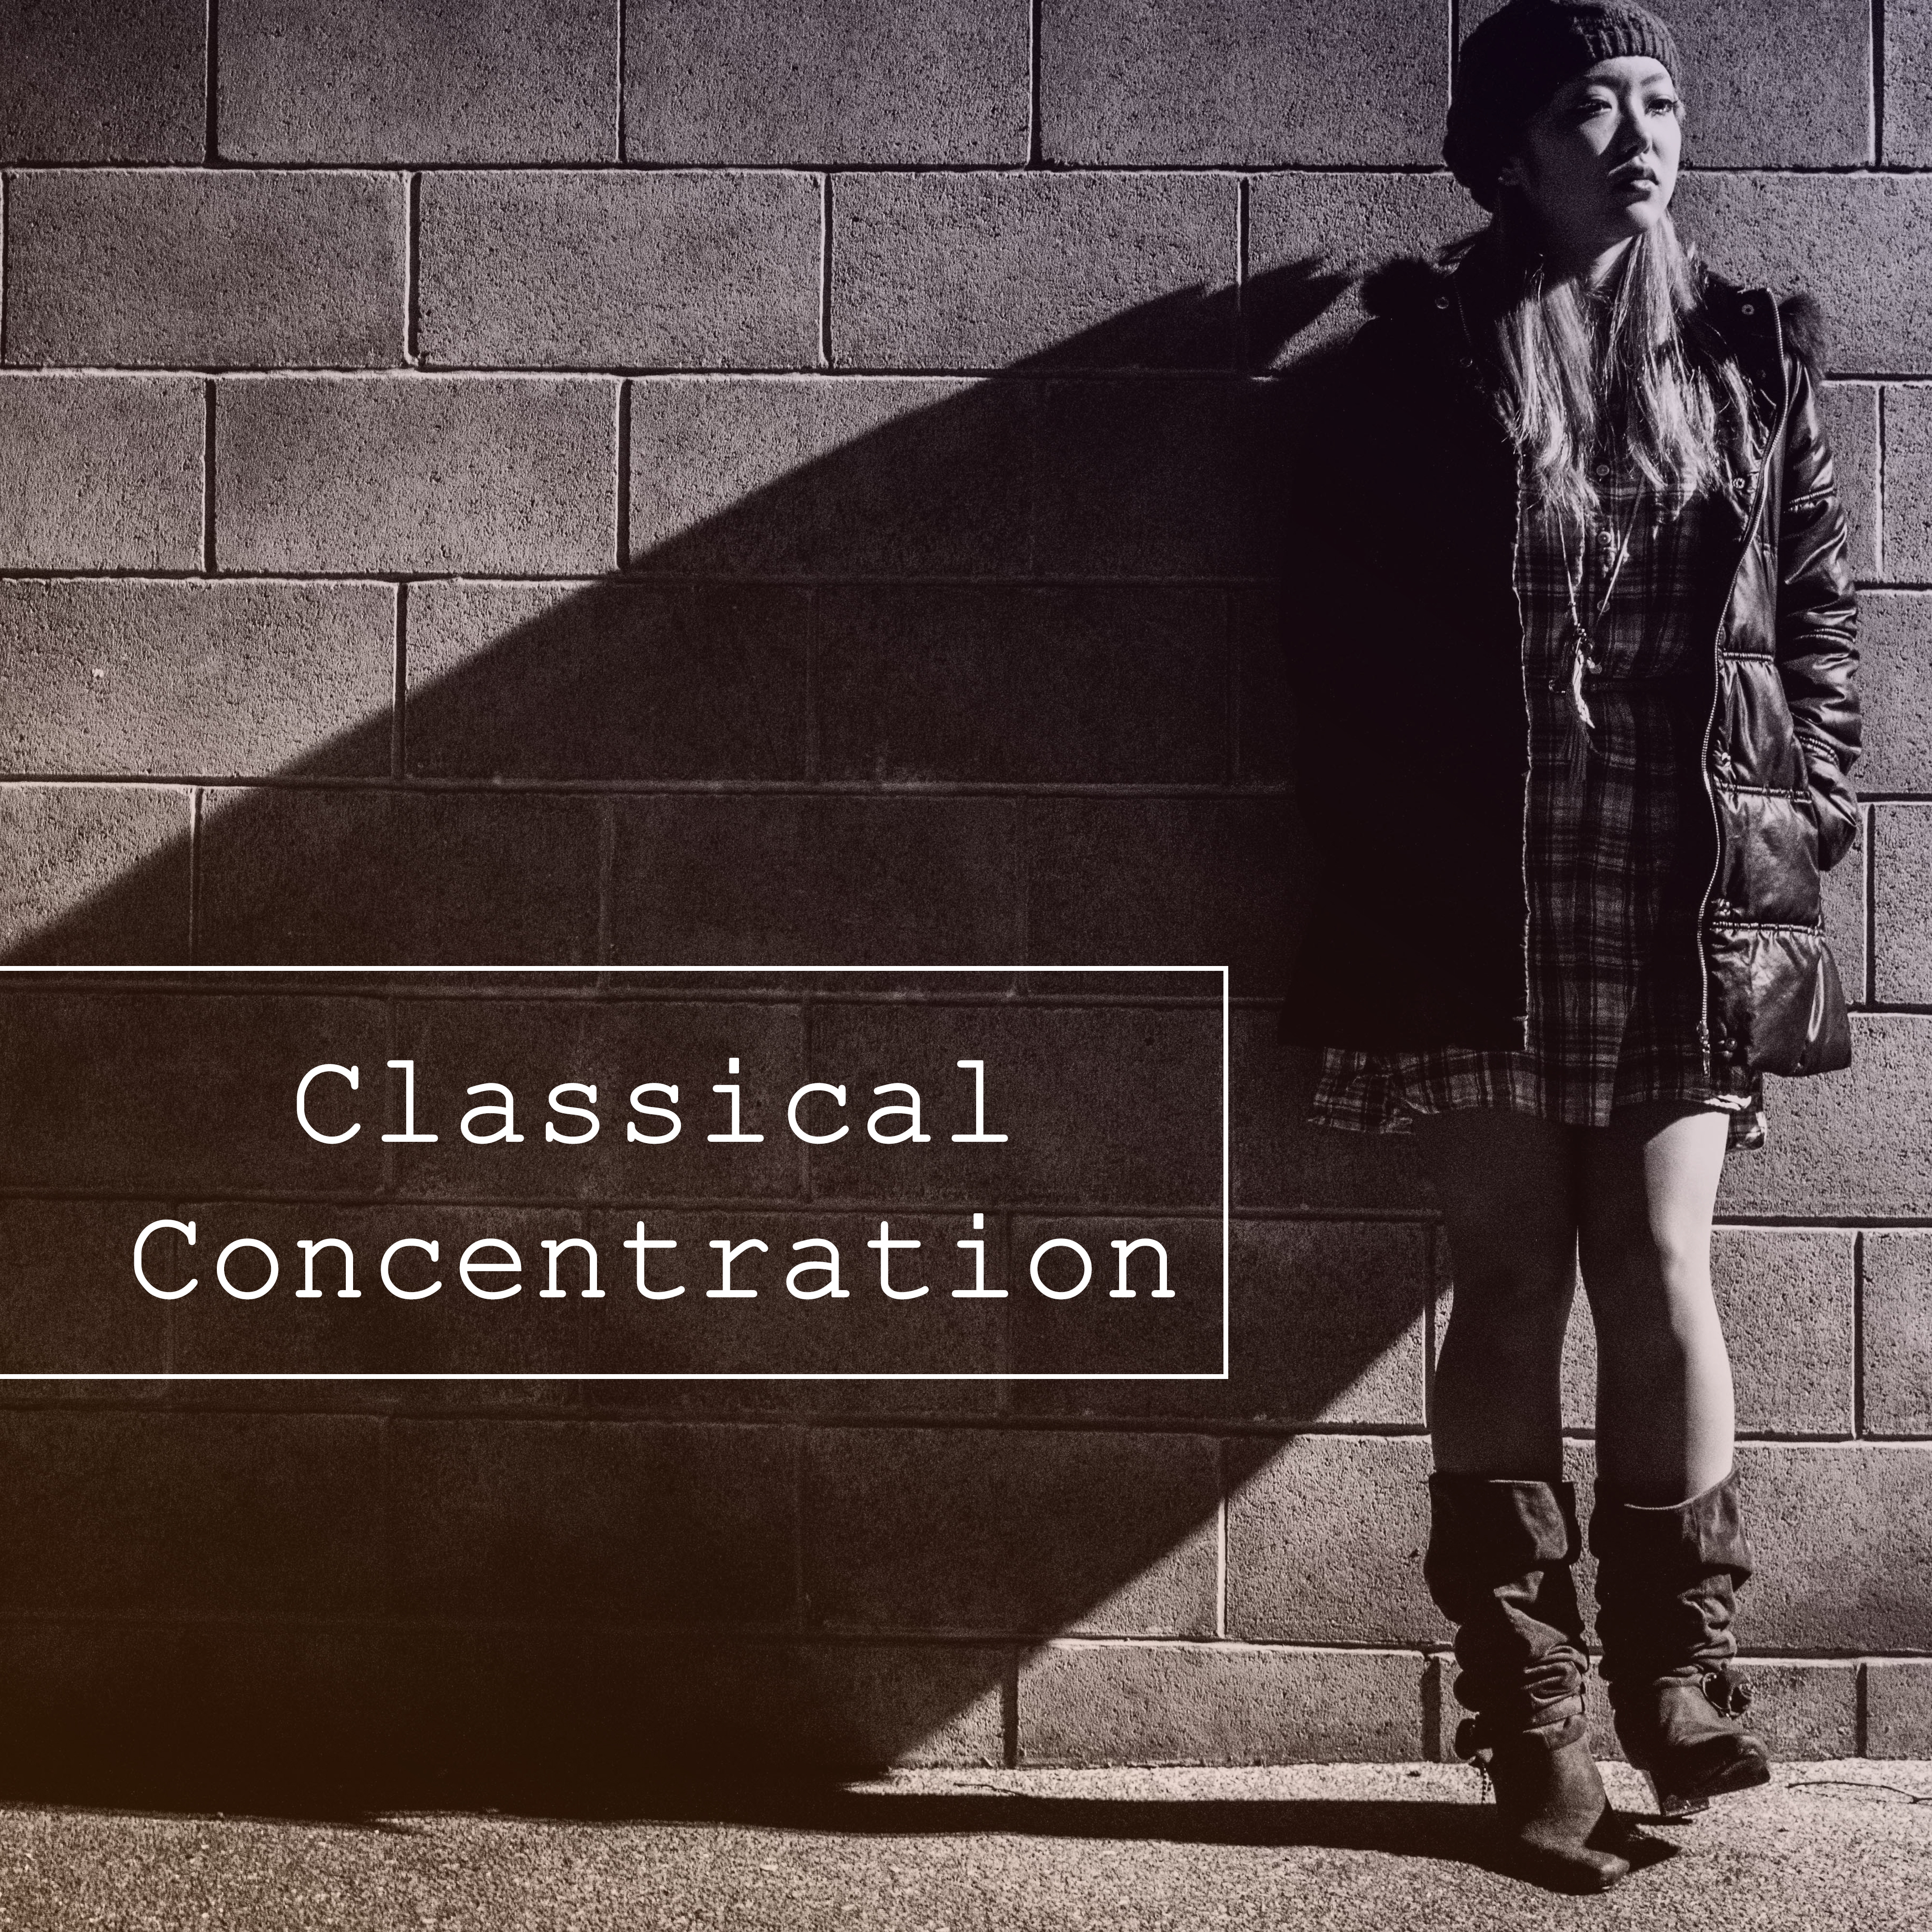 Classical Concentration – Classical Songs for Study, Easier Learning, Einstein Effect, Deep Focus, Bach, Beethoven, Mozart